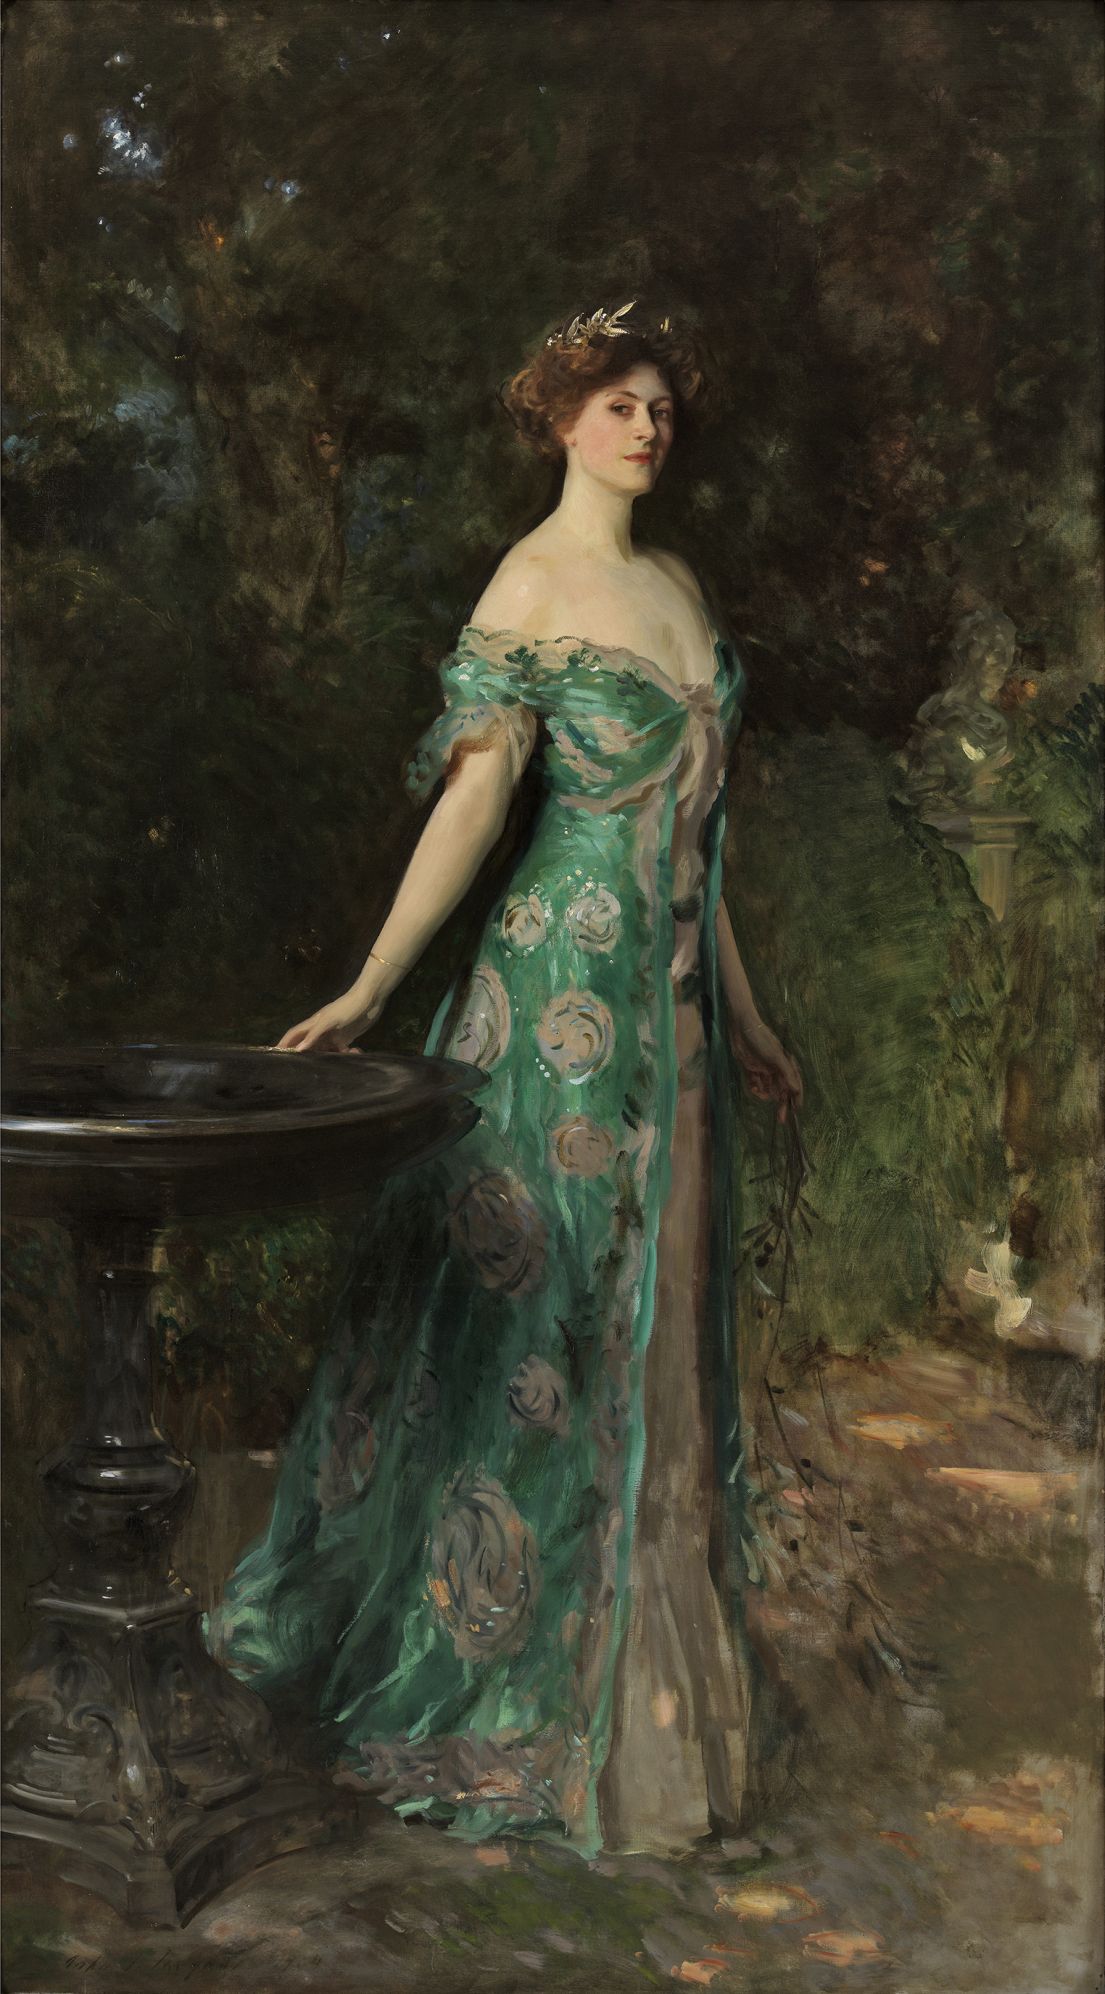 A full length portrait of a women, with a shoulder draped green dress with flowers in a tied up hair. She is depicted standing in a garden.